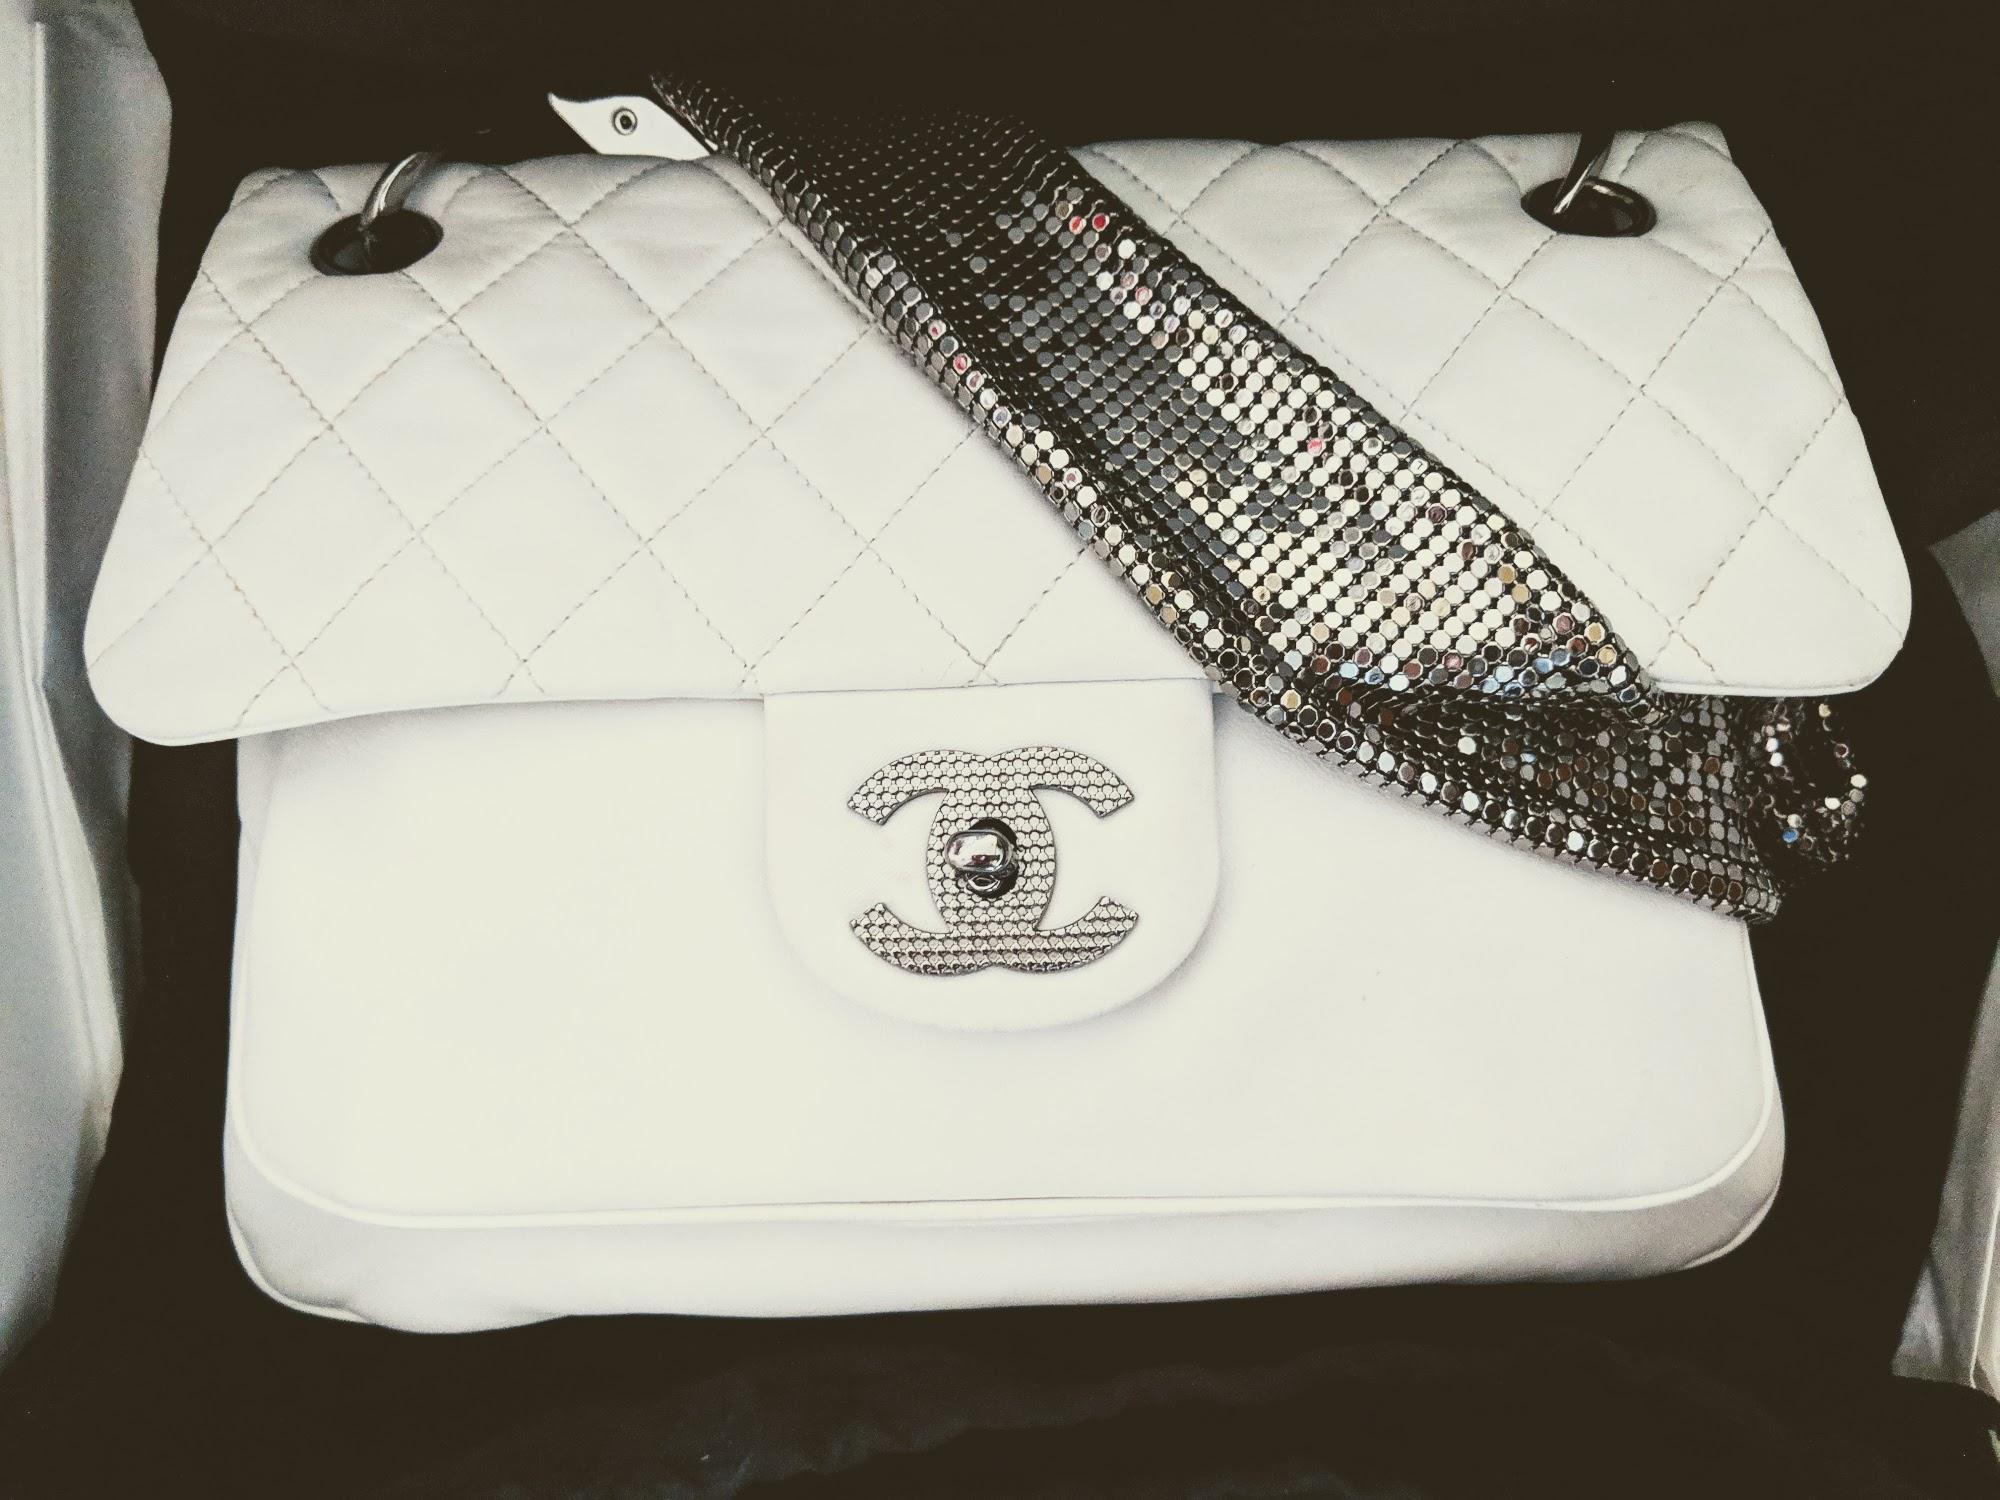 Chanel 2009 Metallic Mesh Limited Edition Soft Lambskin White Classic Flap Bag For Sale 7